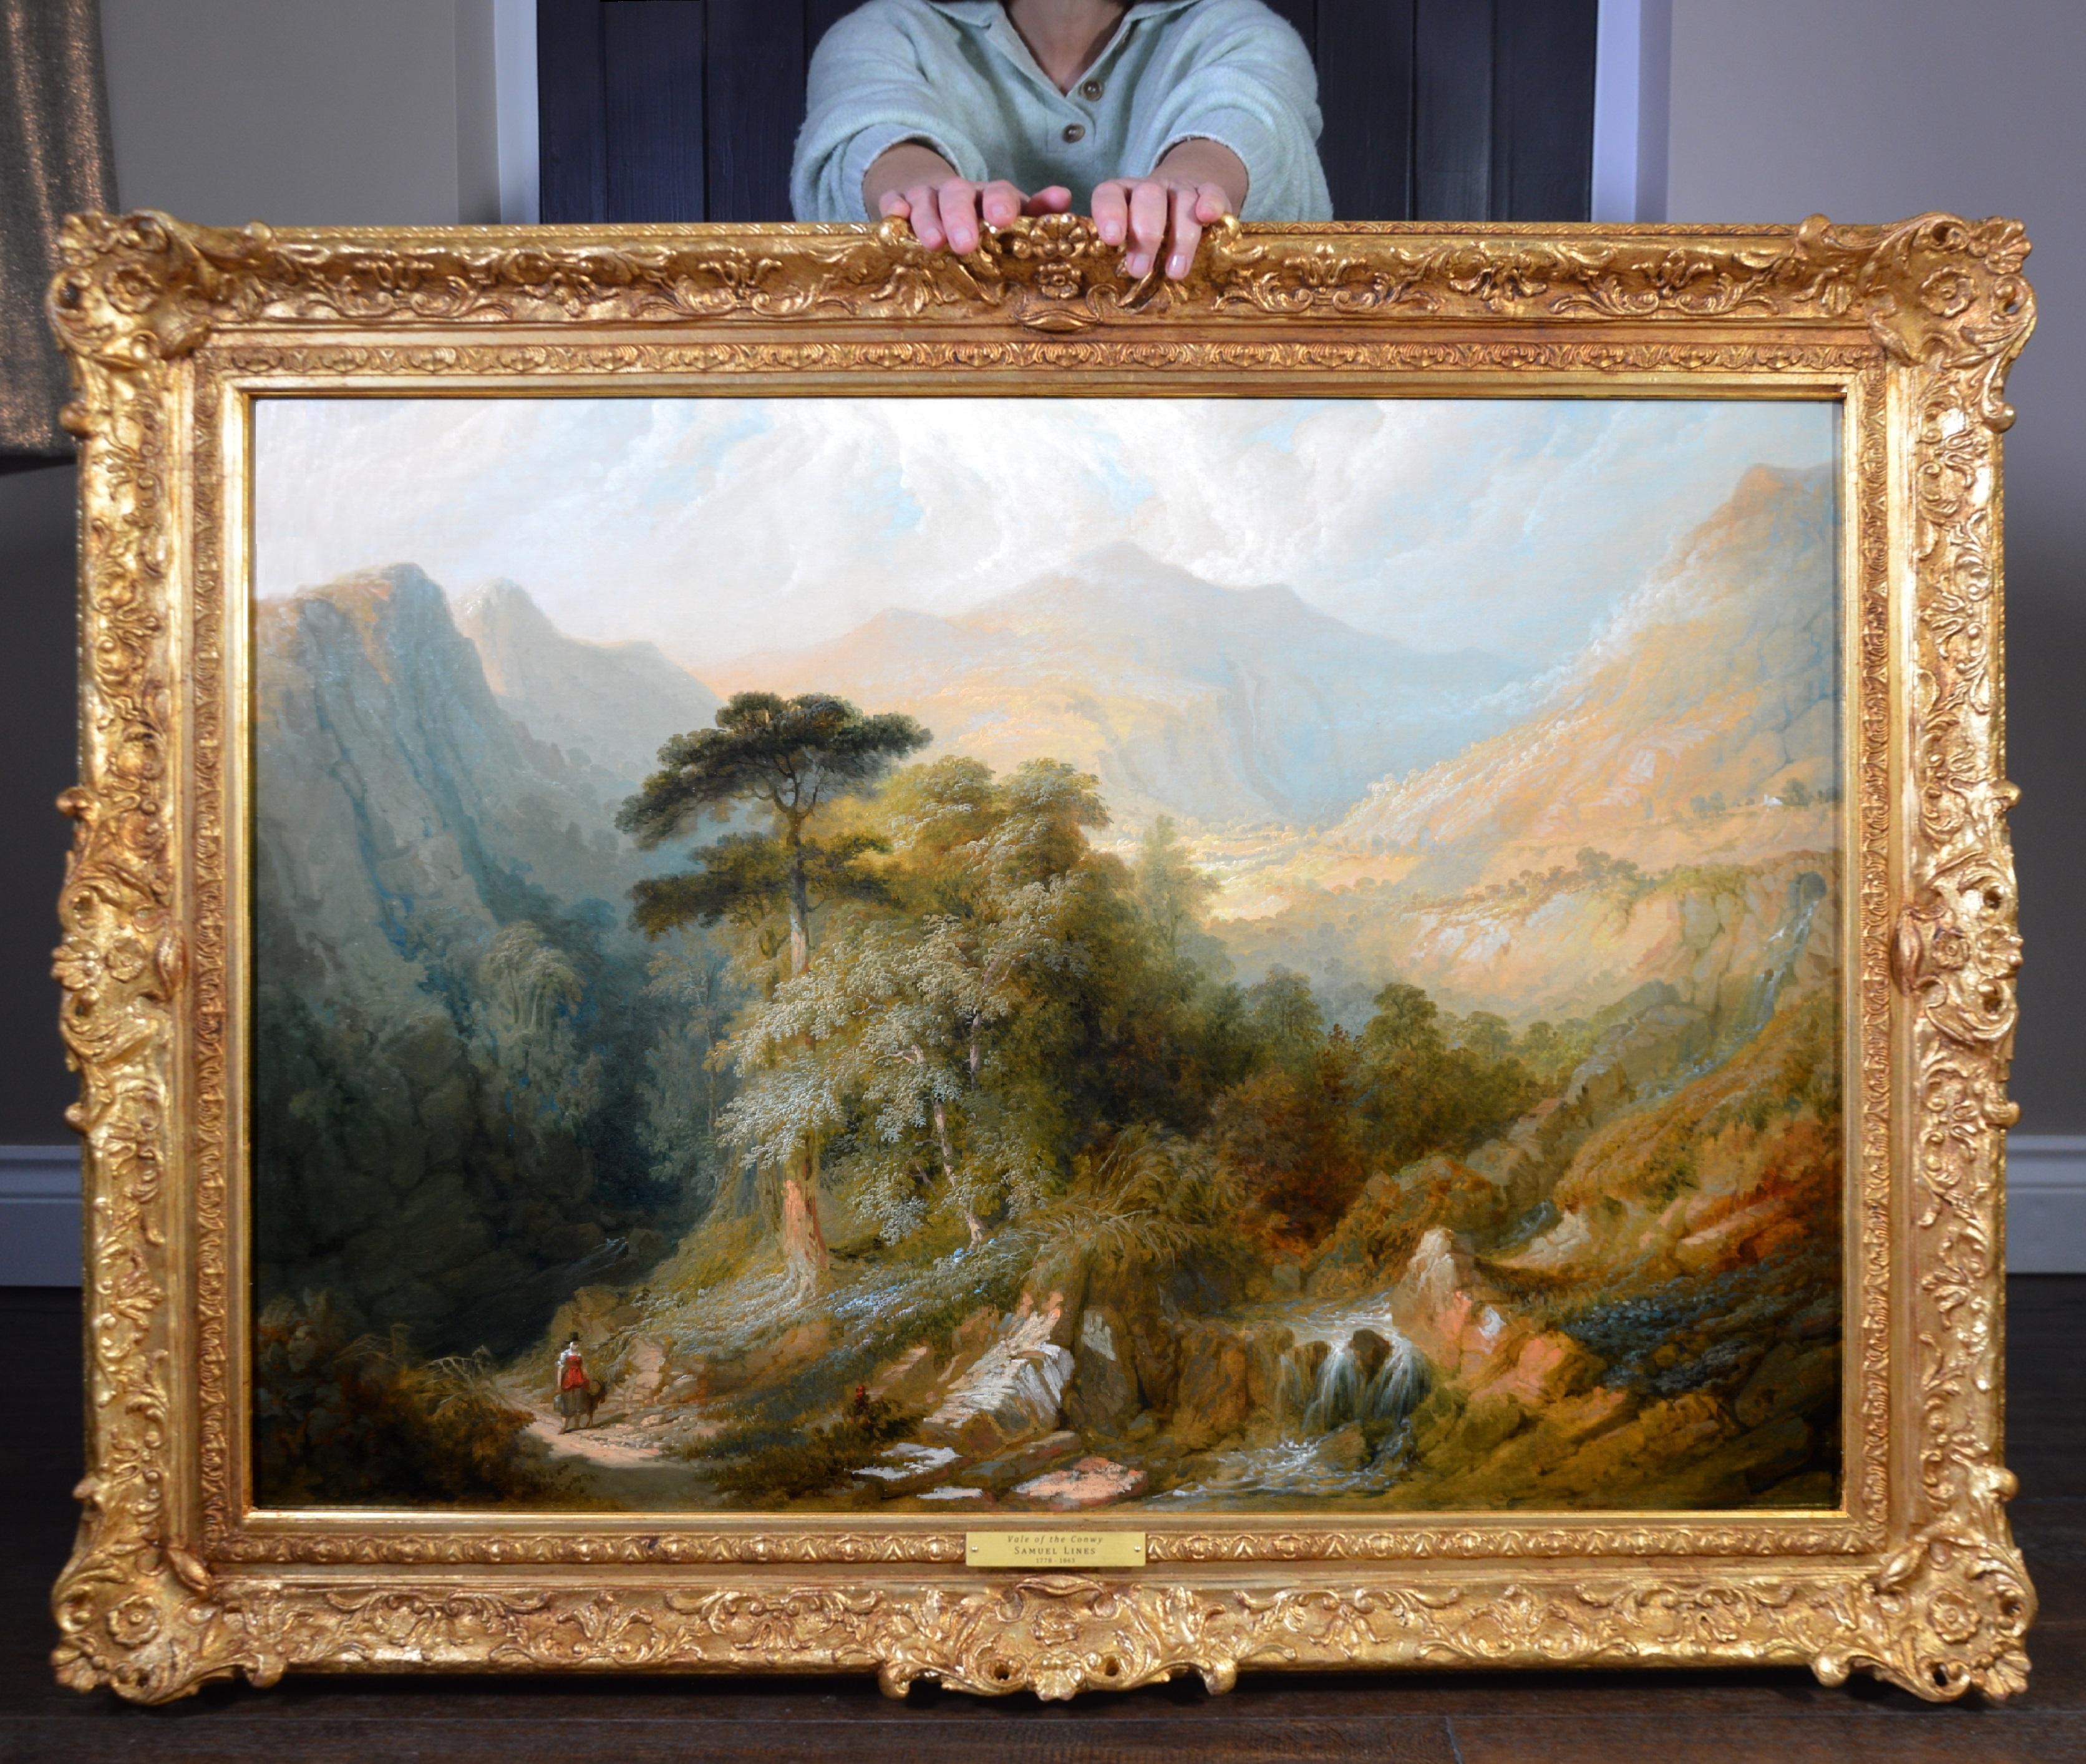 Samuel Lines Landscape Painting - Vale of the Conwy, Snowdonia - Large 19th Century Welsh Landscape Oil Painting 